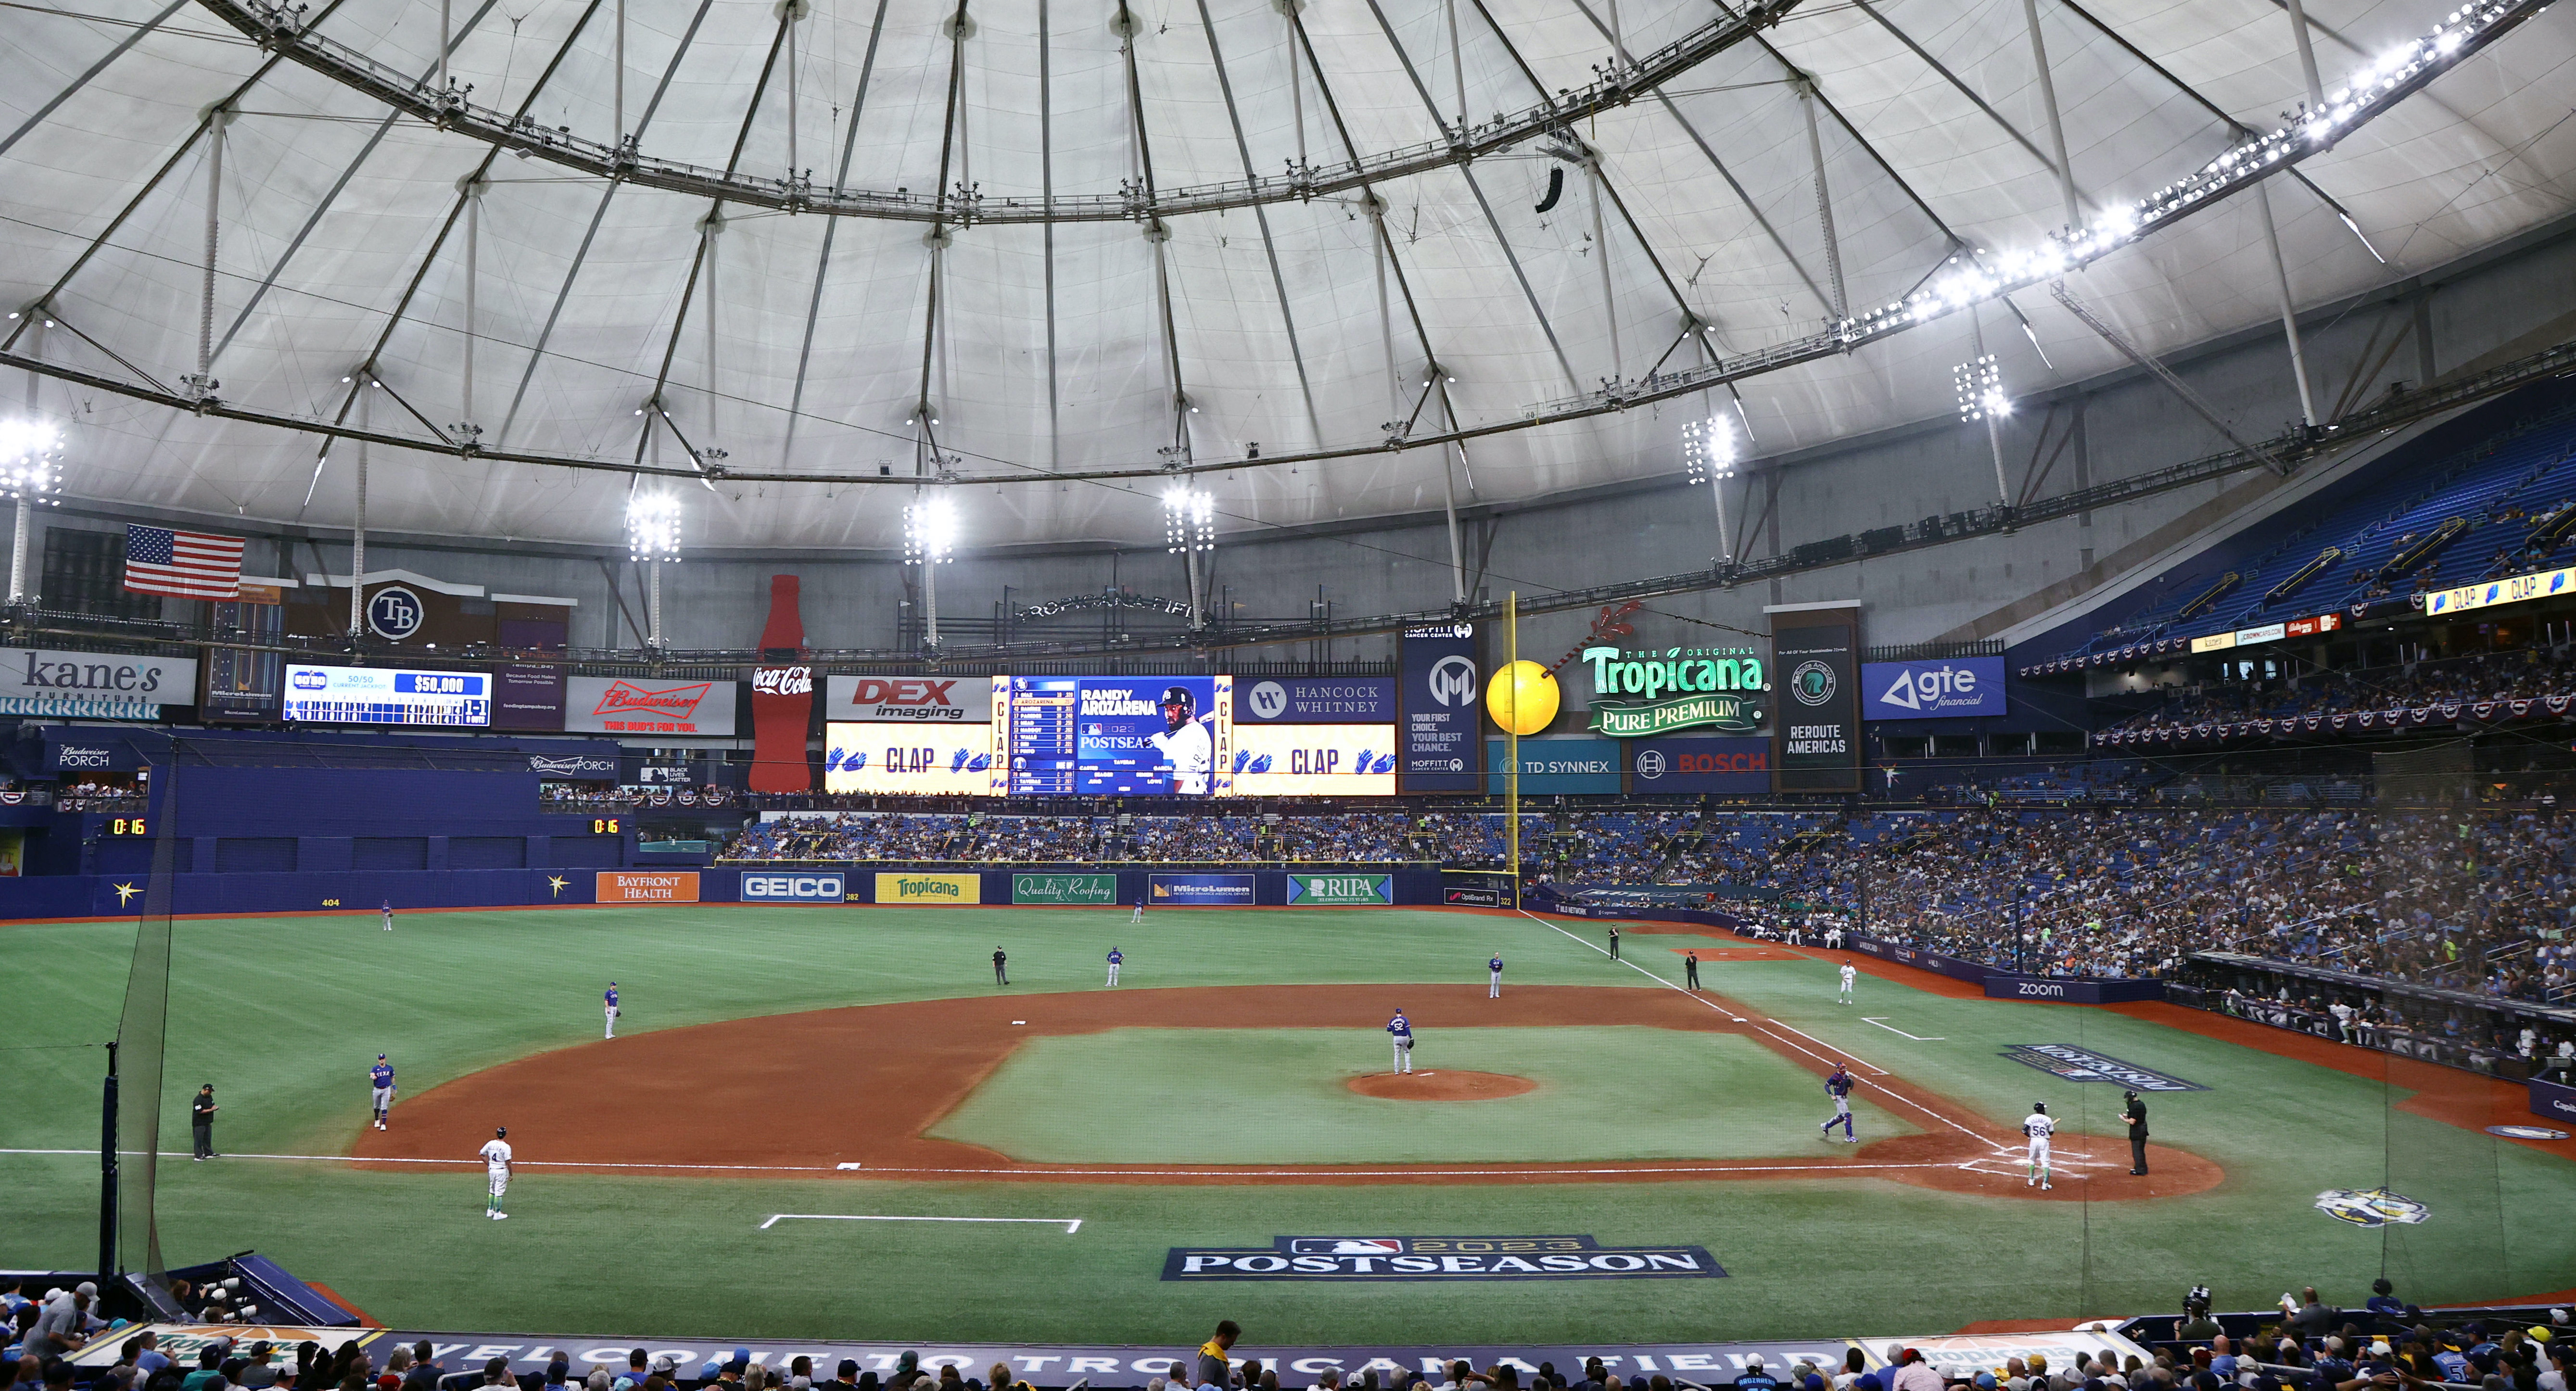 Rays-Rangers Wild Card Game 1 generates lowest MLB postseason attendance in  more than 100 years